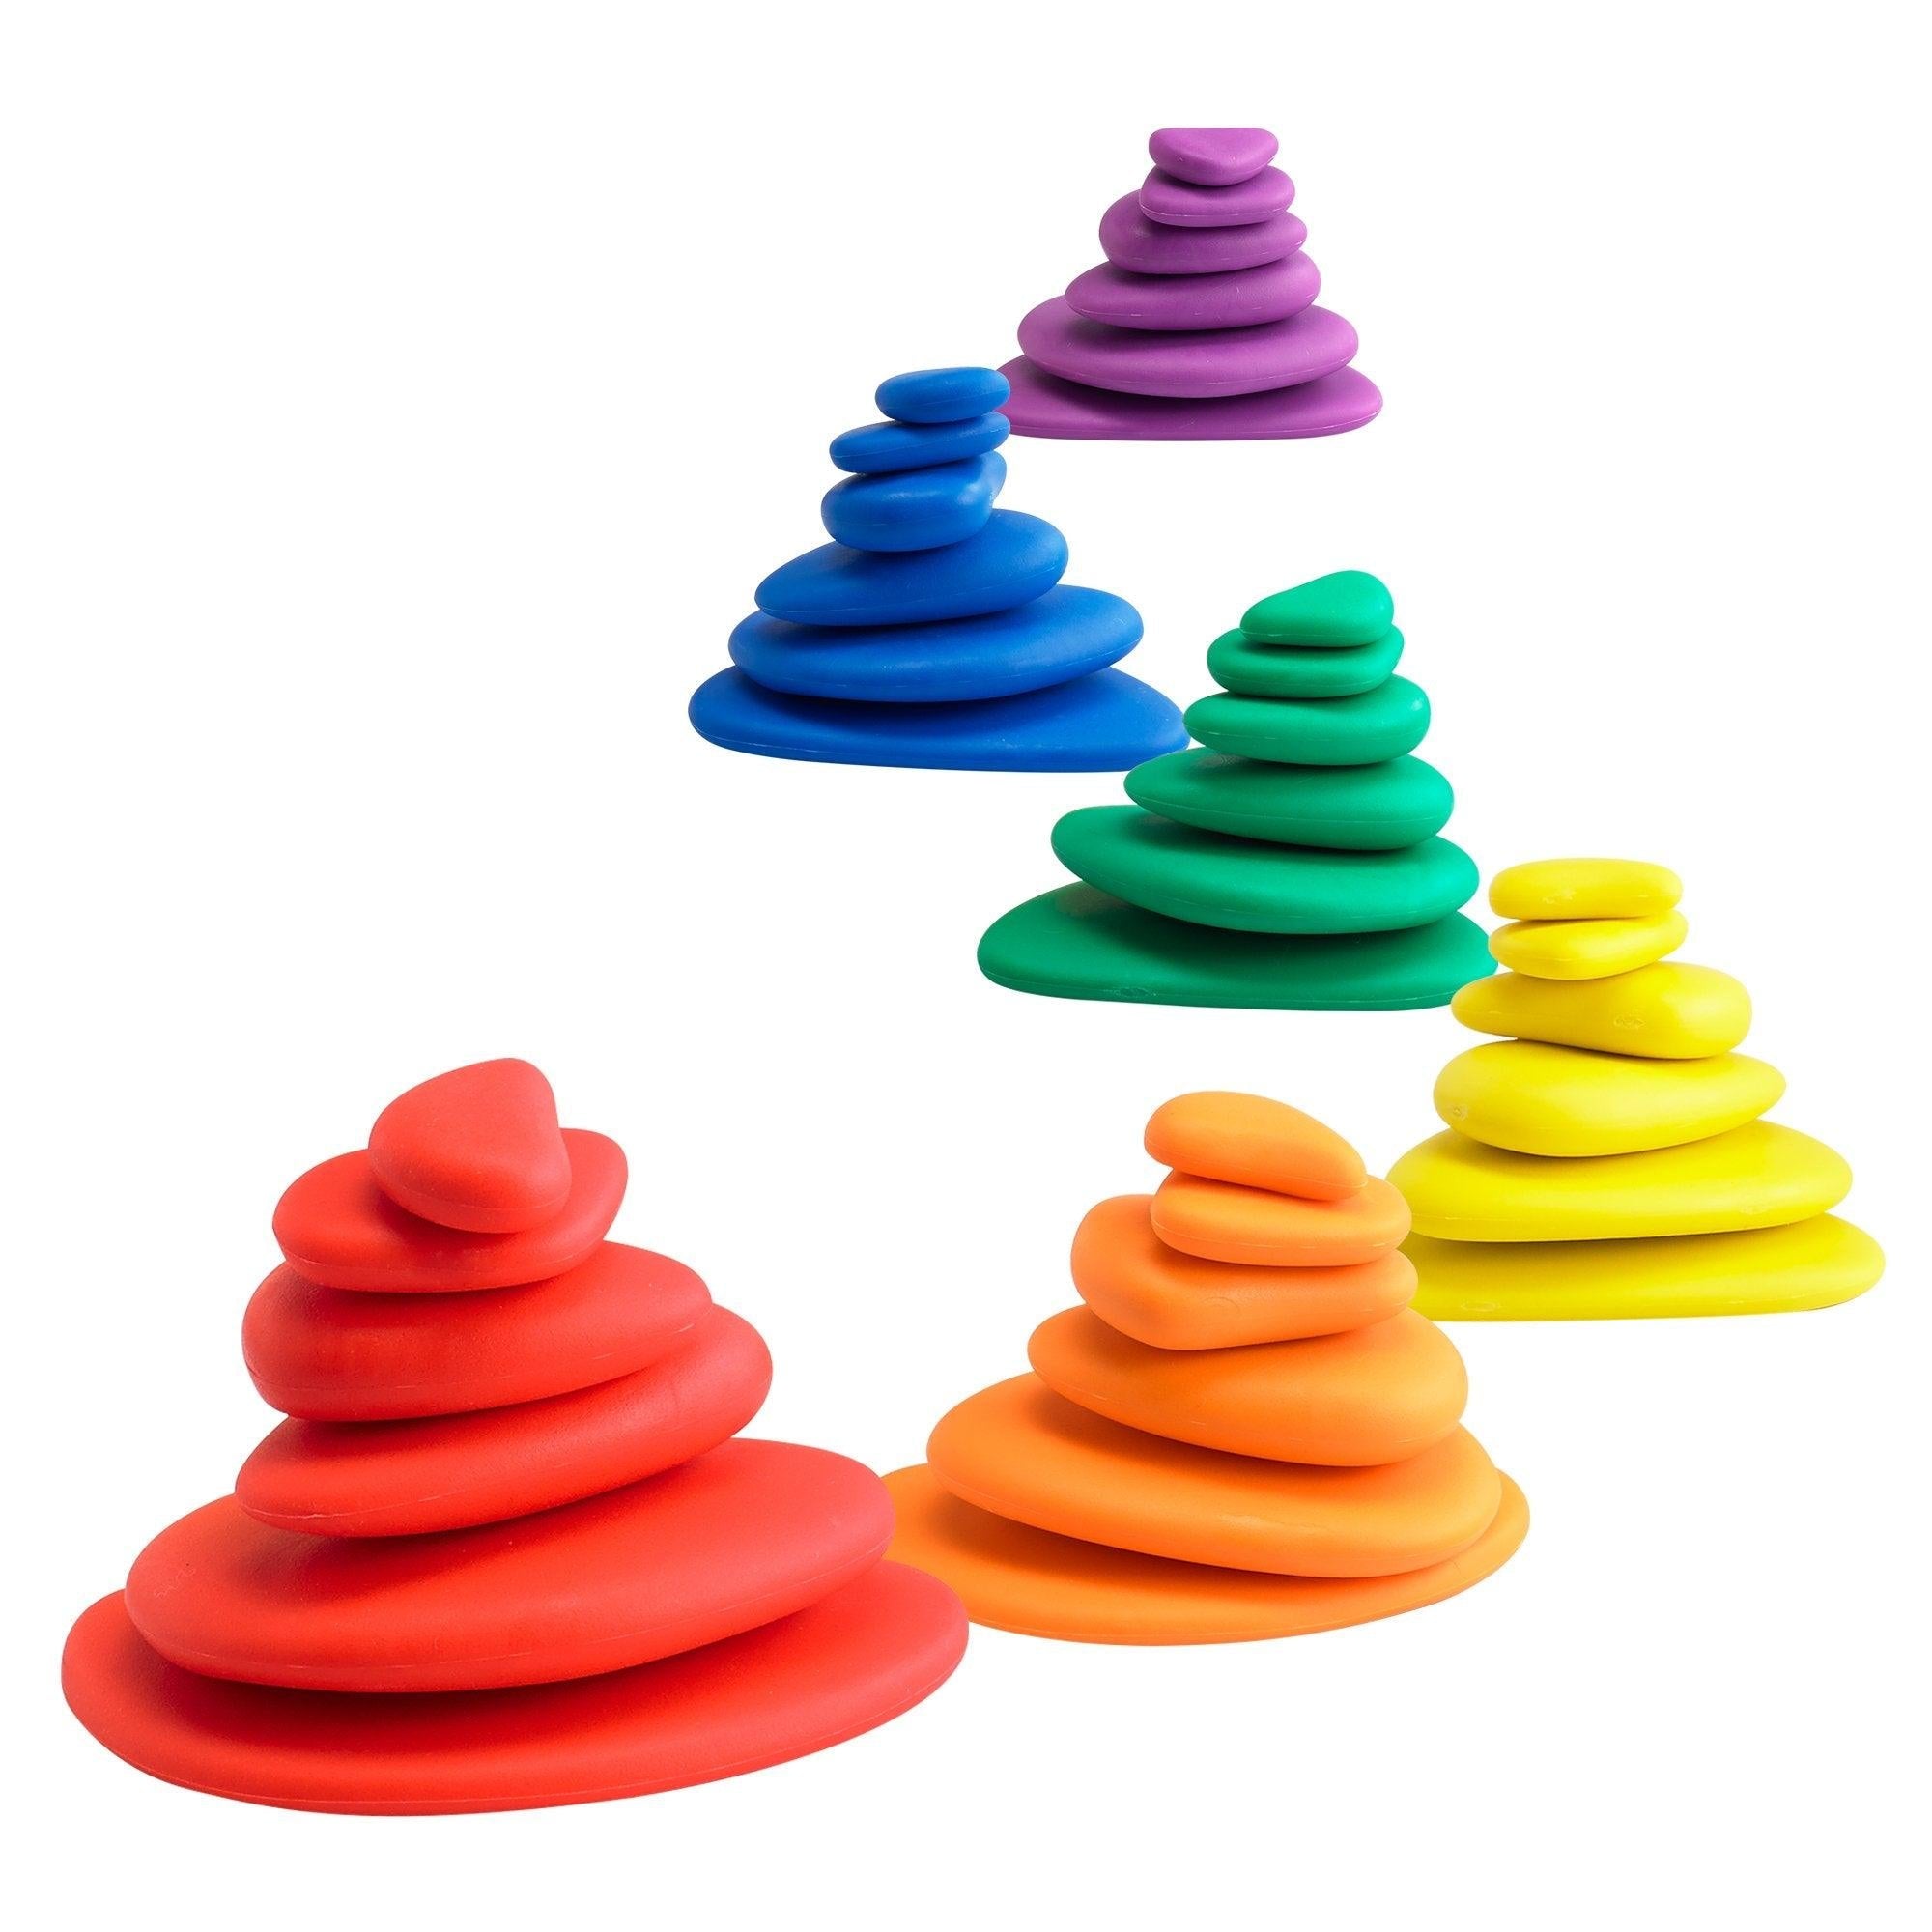 Rainbow Pebbles, The edx education Rainbow Pebbles are fantastic for children to play, learn and get creative! These safe, smooth and tactile pebbles will spark your child's curiosity and encourage them to use their imagination to develop unique and interesting ways to incorporate them into play. Their odd shape makes them wobble when stacked, creating an extra challenge for young learners, and developing fine motor skills. Their rainbow colours and tangible texture make them ideal sensory toys for children